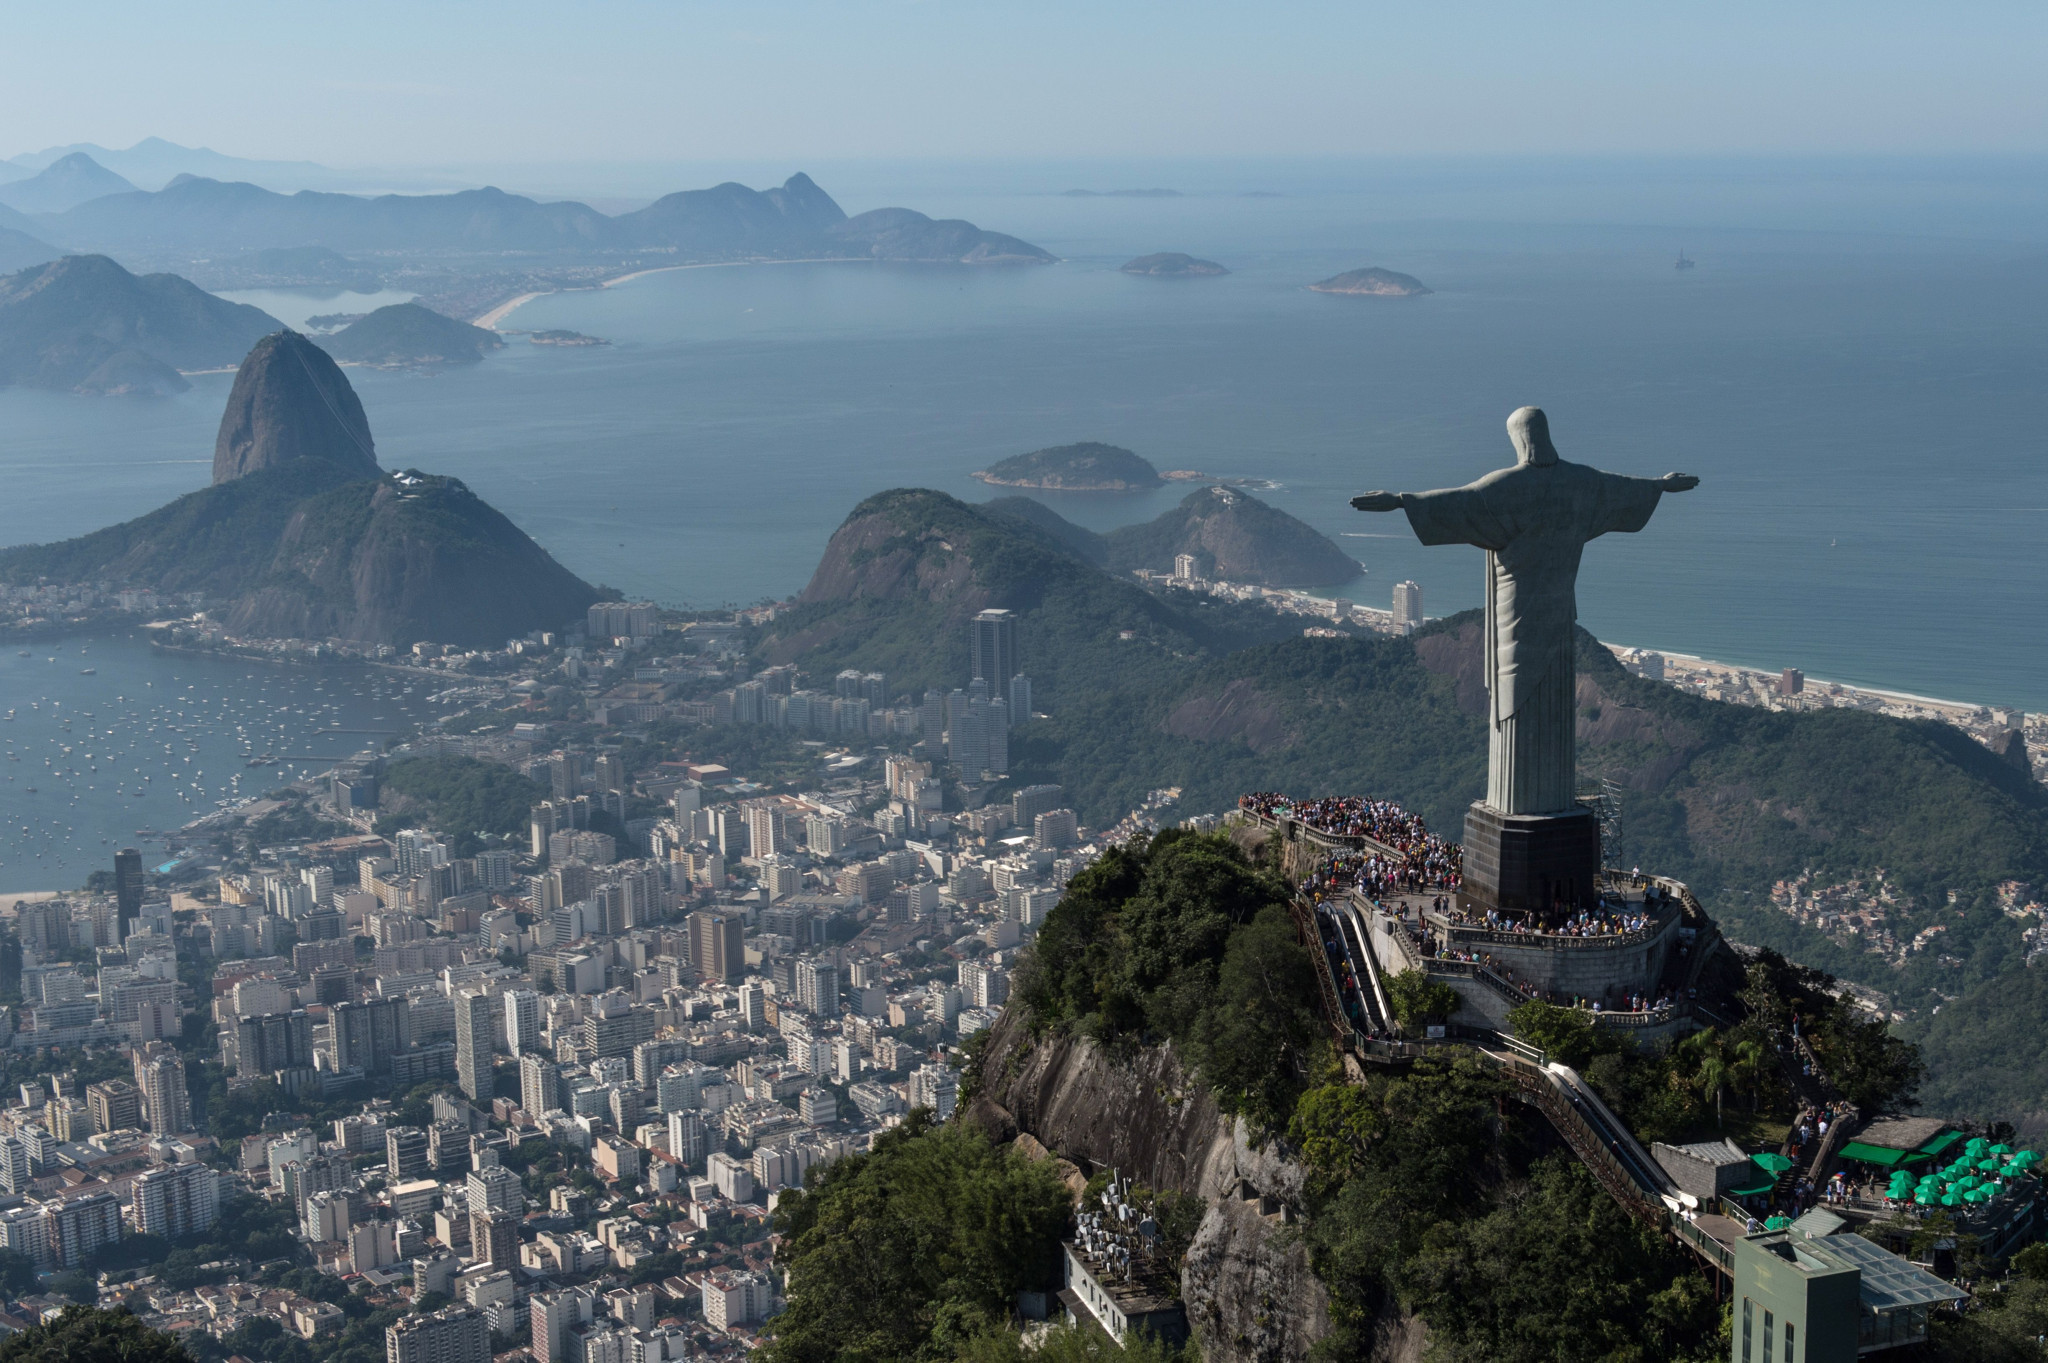 The new paper is said to confirm the conclusions of previous research in Brazil that attested to the economic benefits of the Olympics in Rio de Janeiro ©Getty Images